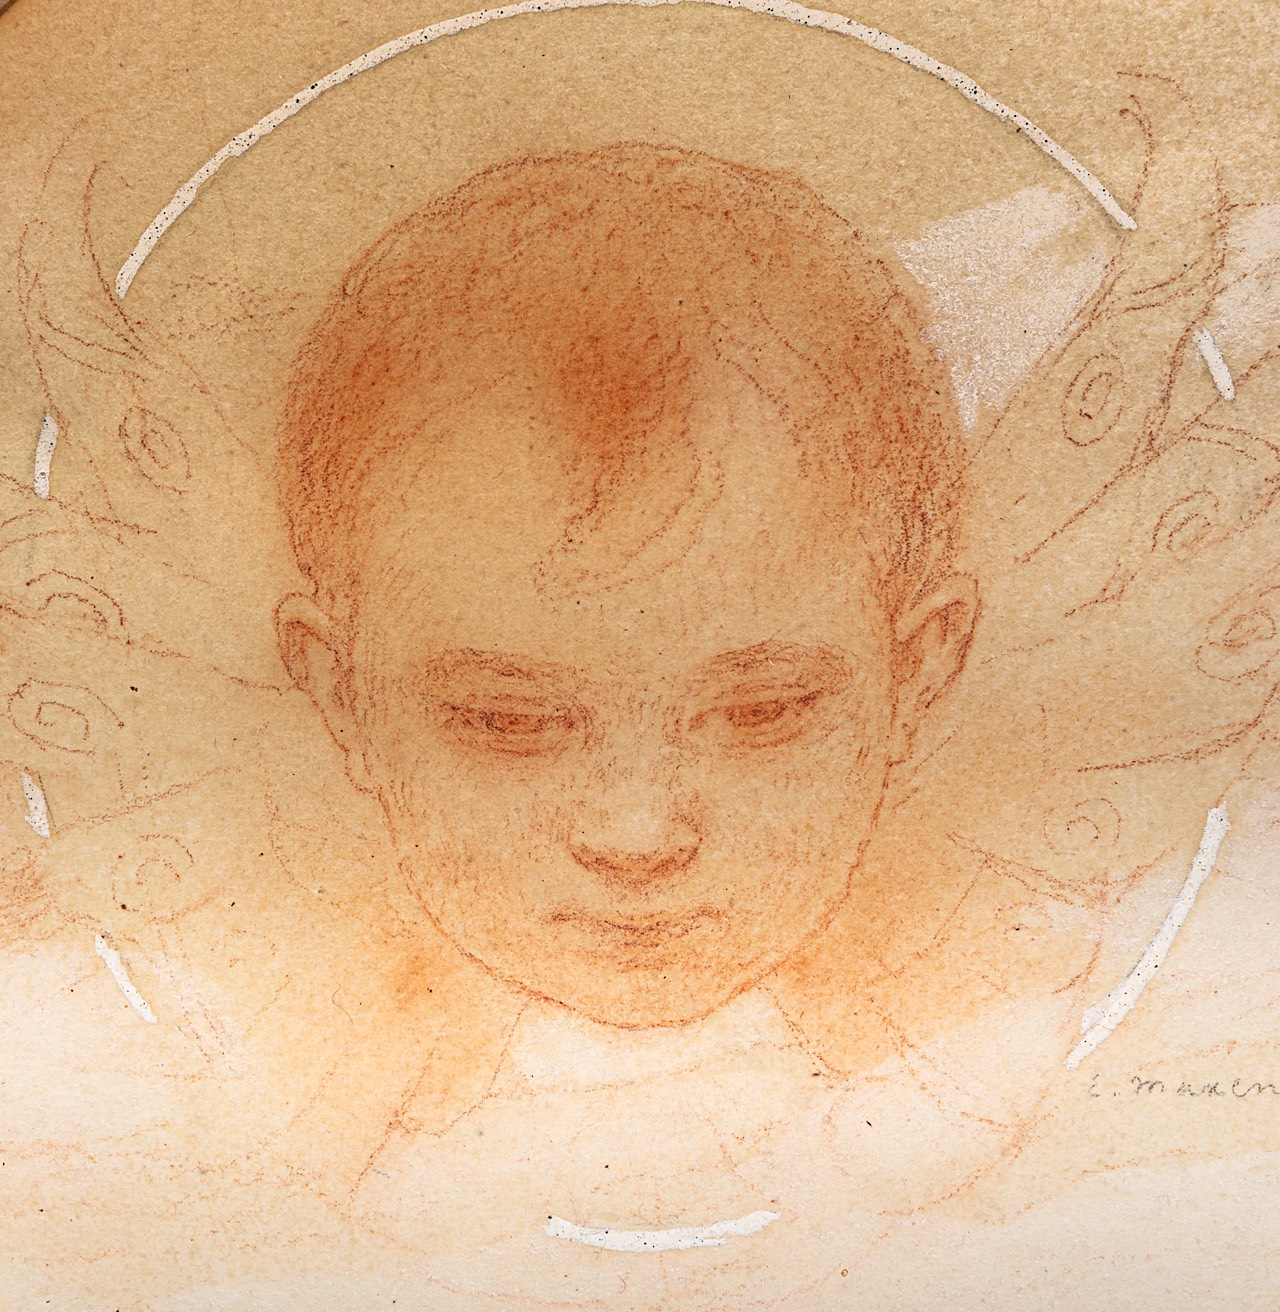 Edgard Maxence (1871-1954), study of a cherub's head, sanguine drawing heightened with white gouache - Image 5 of 5